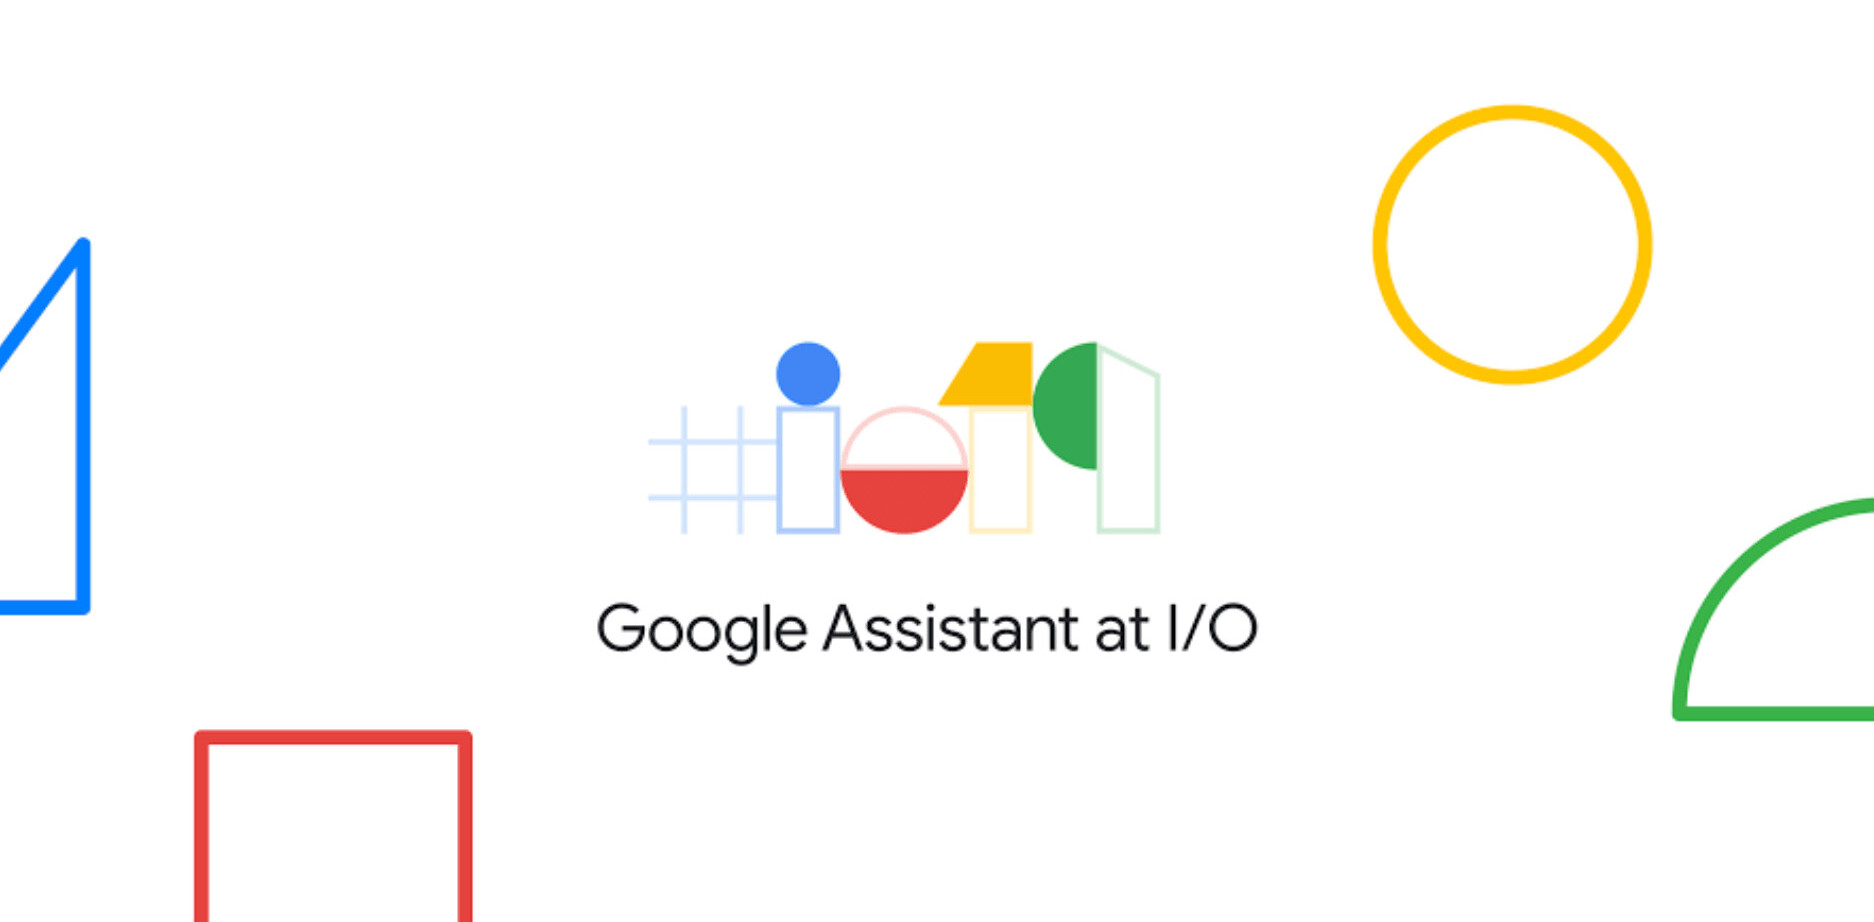 Google’s new Assistant is so fast that ‘tapping to use your phone would seem slow’